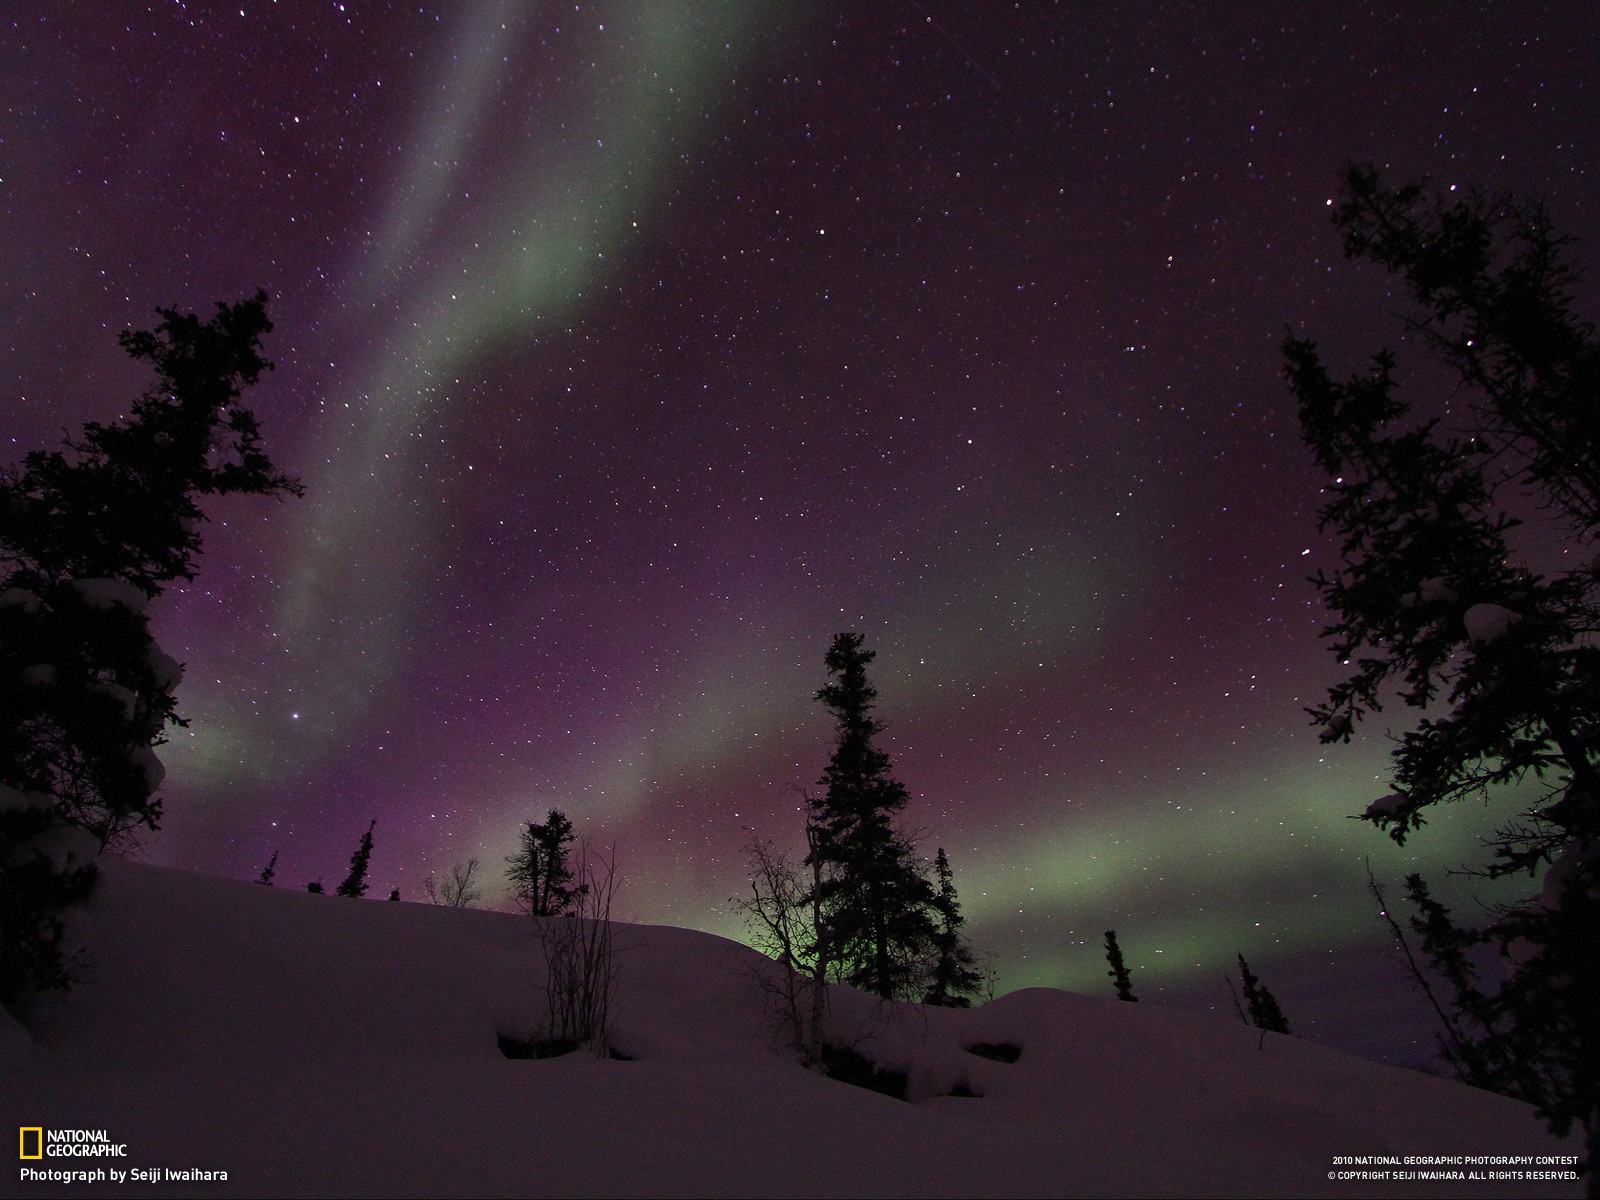 General 1600x1200 landscape snow trees night National Geographic stars aurorae 2010 (Year)